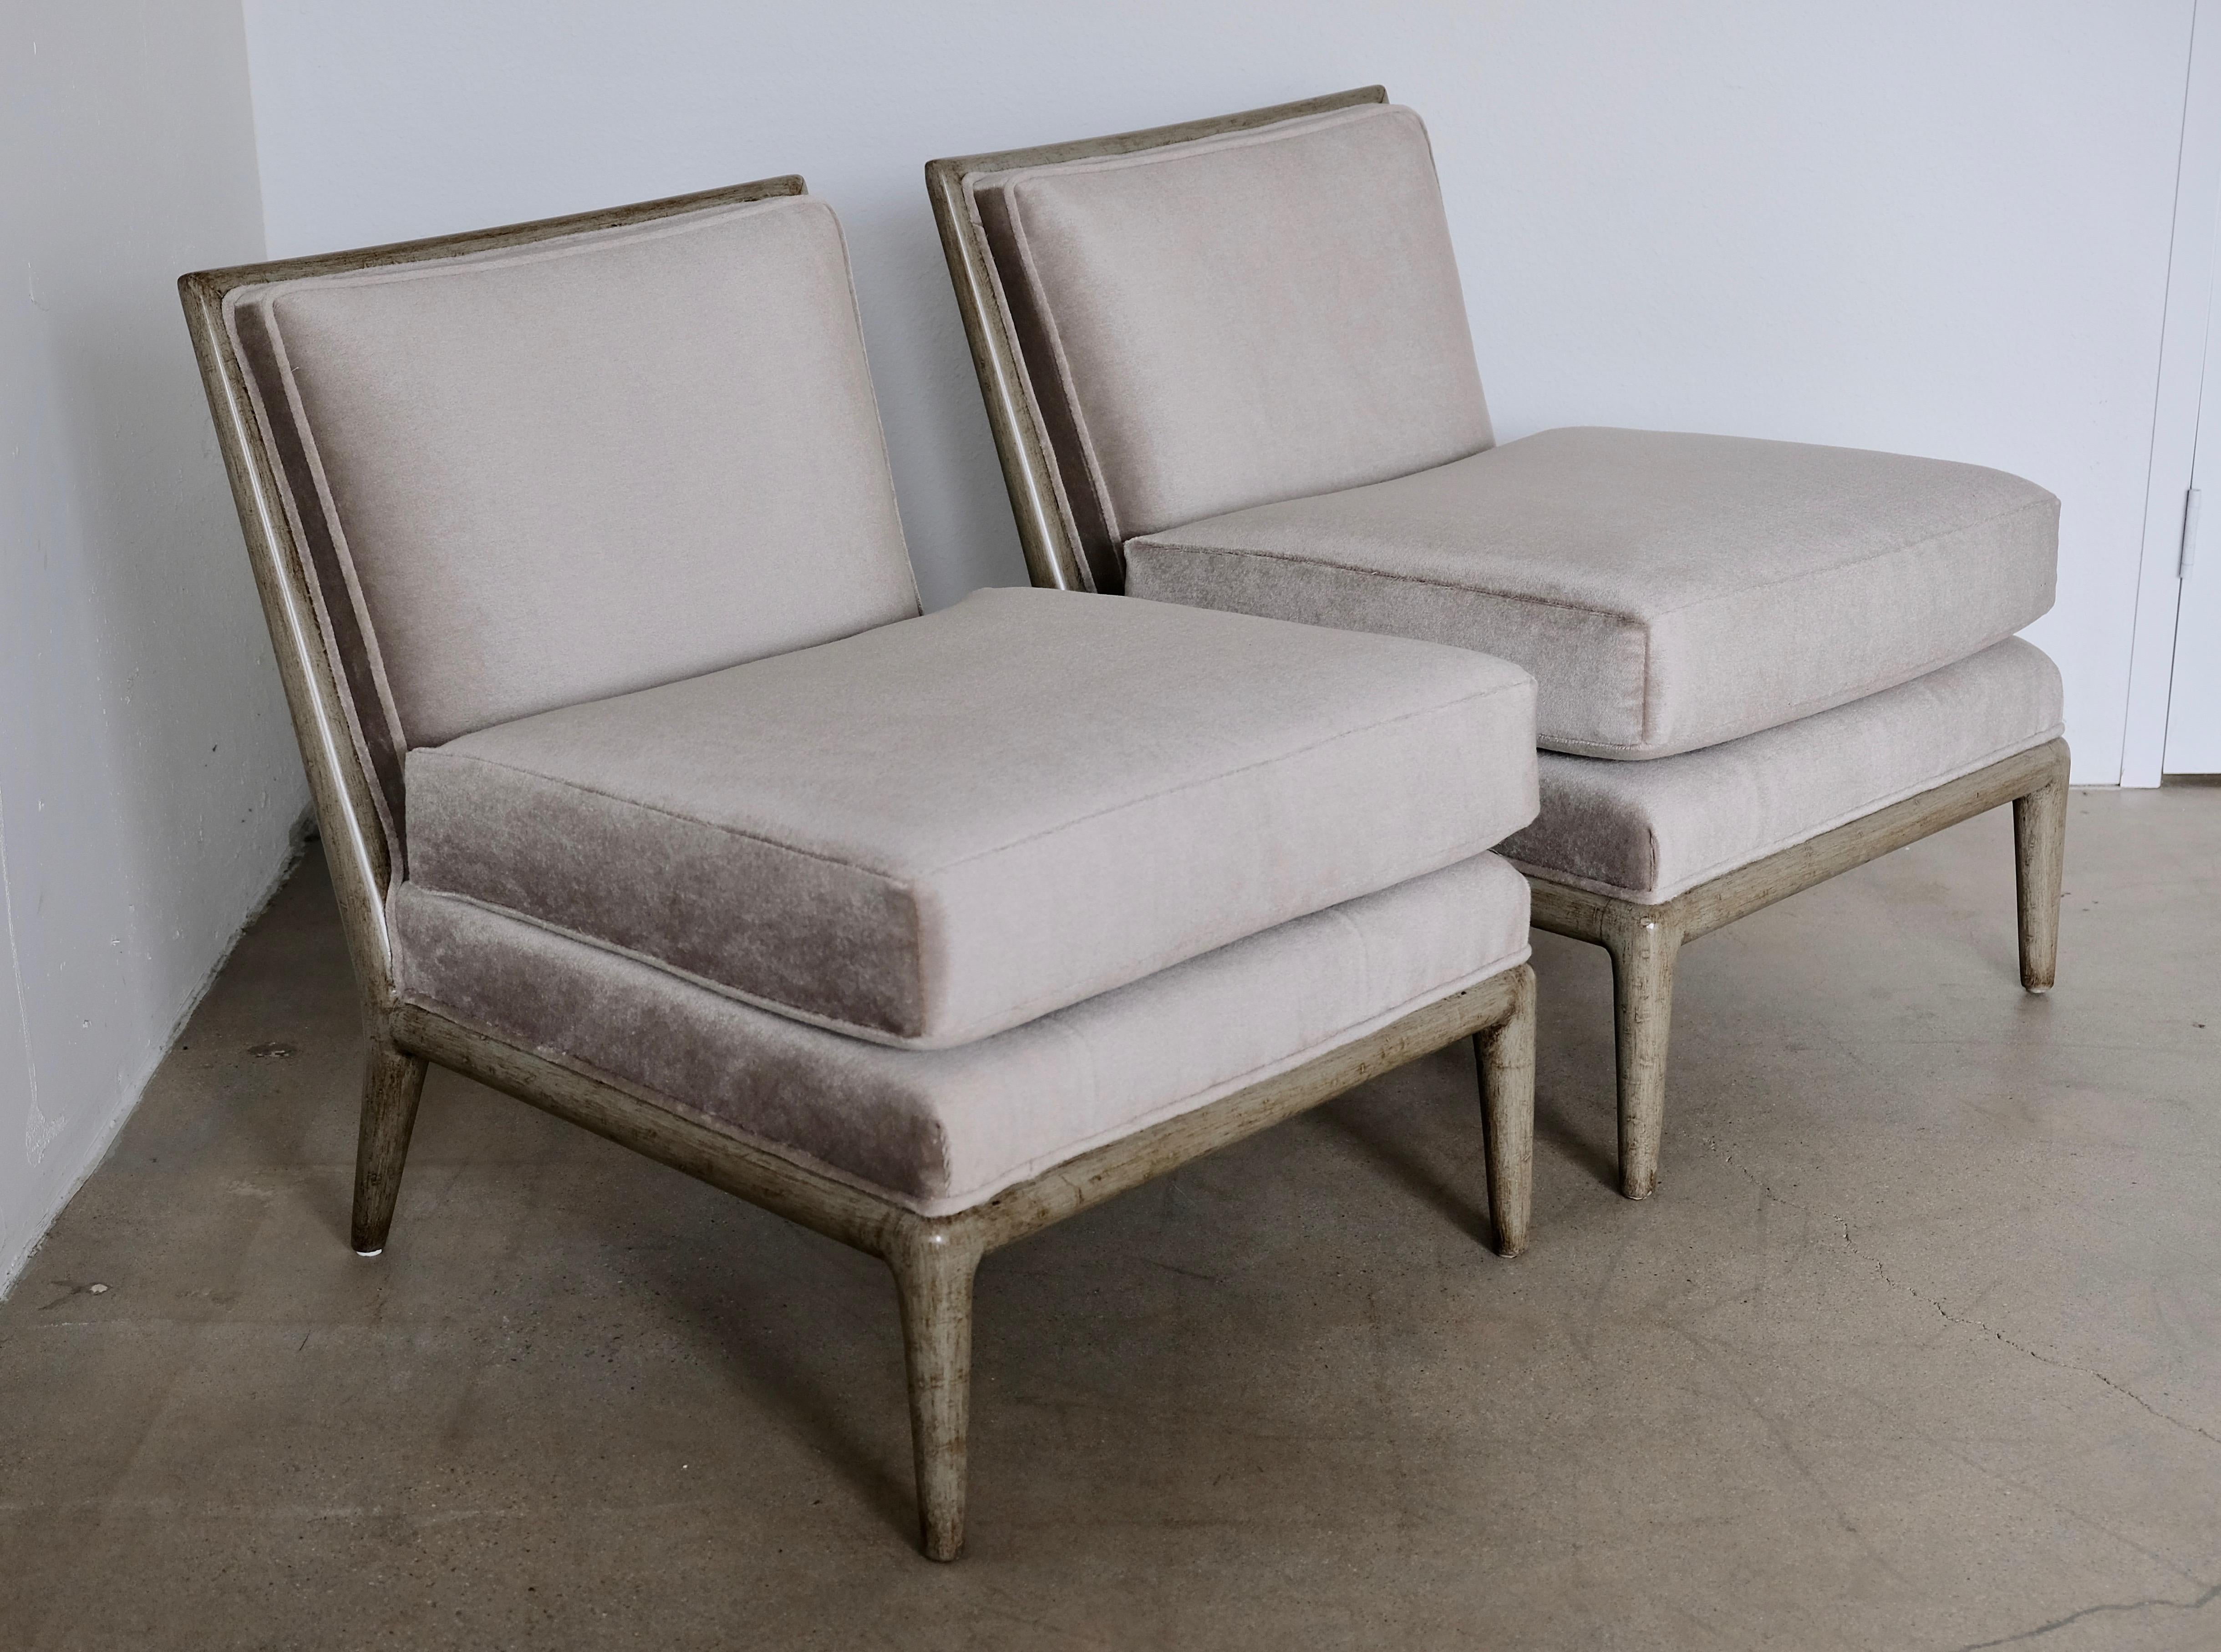 A pair of vintage Mid-Century Modern slipper chairs in the style of Paul McCobb and T.H. Robsjohn Gibbings. The chairs have been recovered in a silver grey mohair fabric. The base has an antiqued grey finish. The top seat cushion is removable and